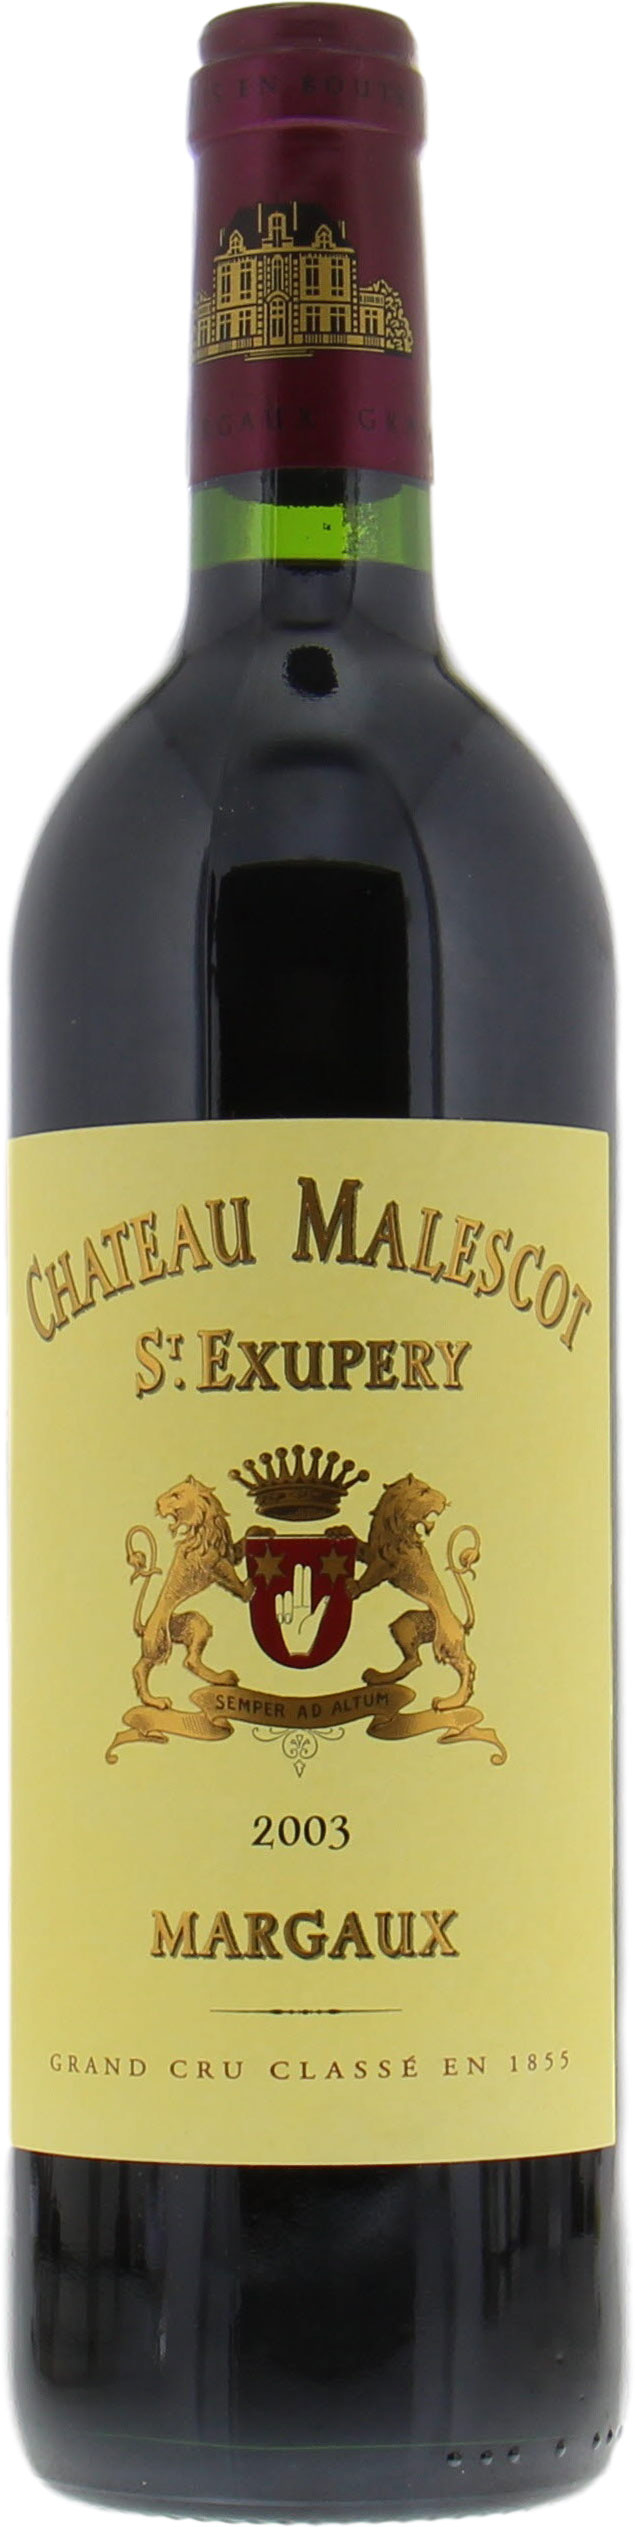 Chateau Malescot-St-Exupery - Chateau Malescot-St-Exupery 2003 From Original Wooden Case